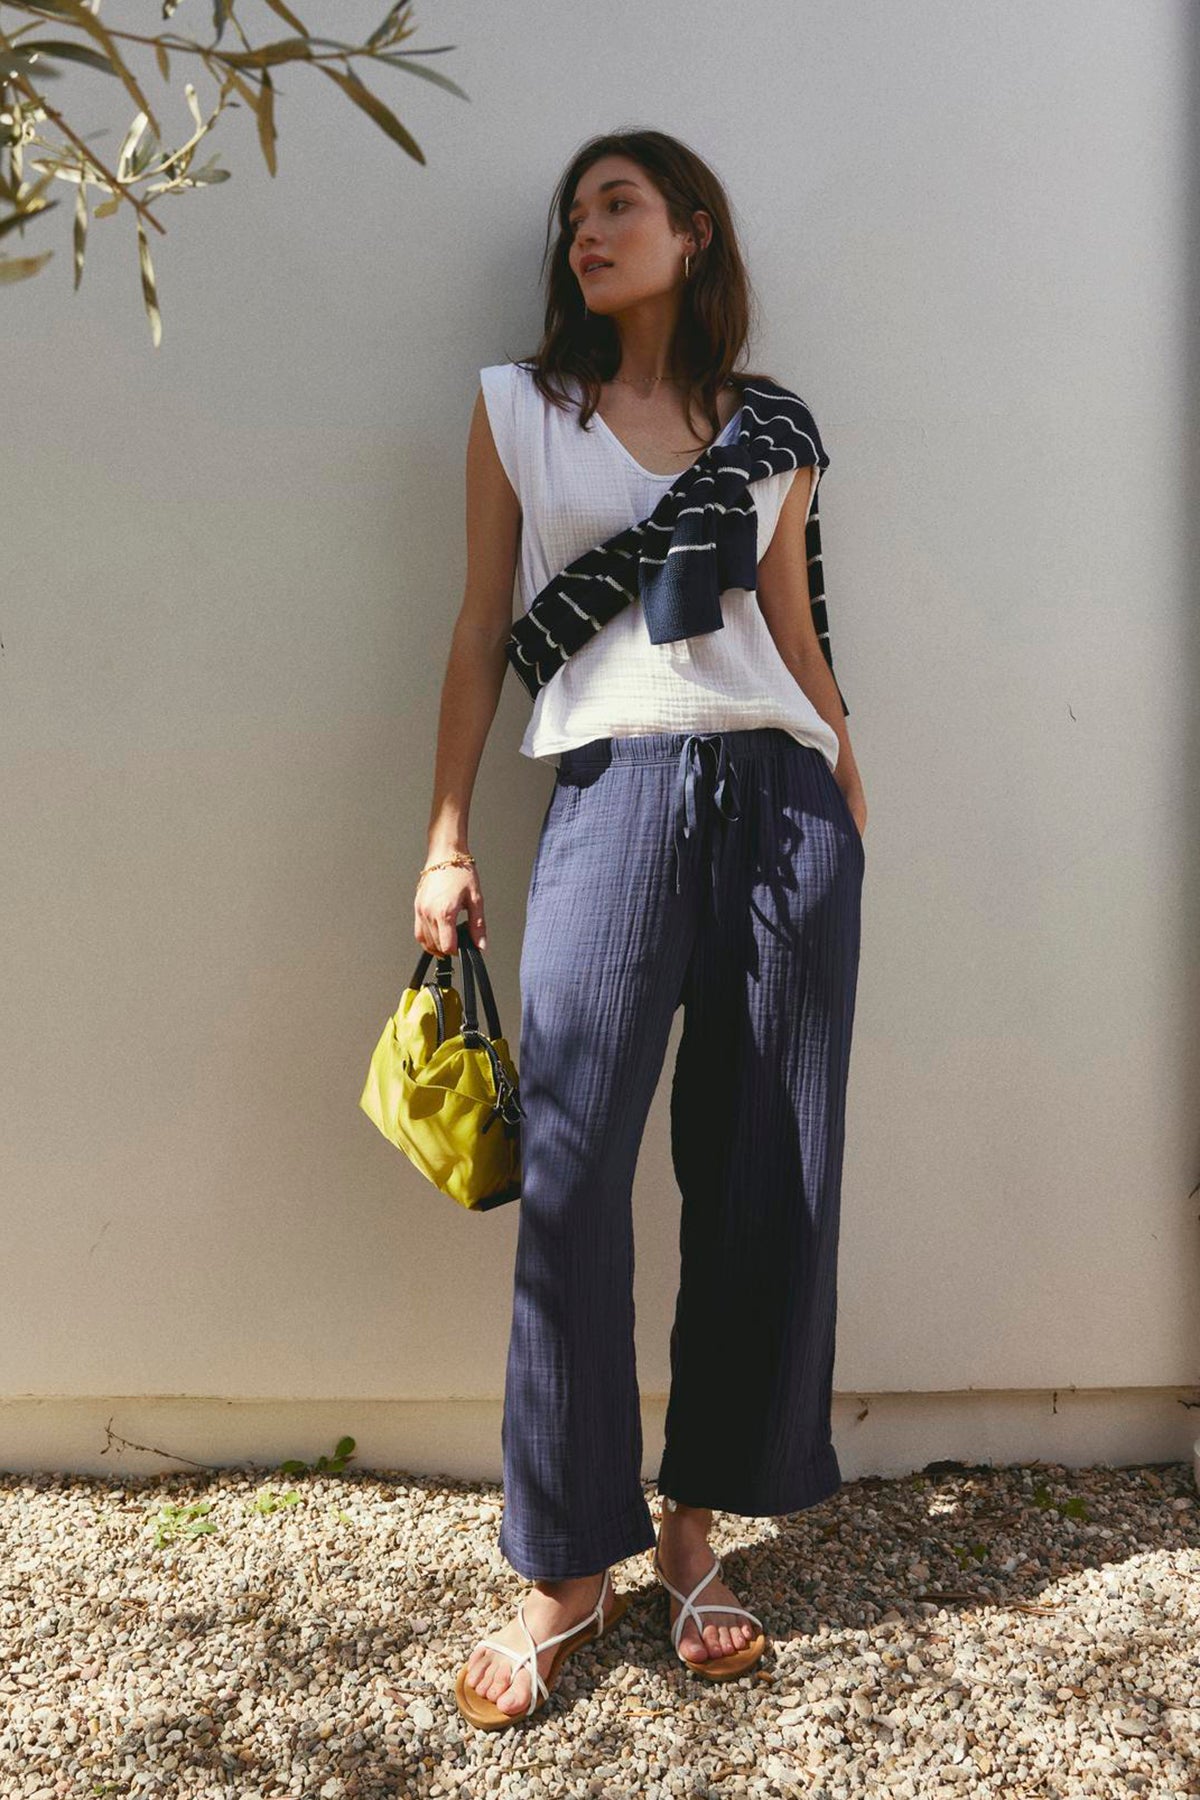 A woman in a JAYLA COTTON GAUZE TANK TOP by Velvet by Graham & Spencer and blue striped pants stands against a light wall, holding a yellow bag, with sunlight casting shadows of leaves.-36443742994625